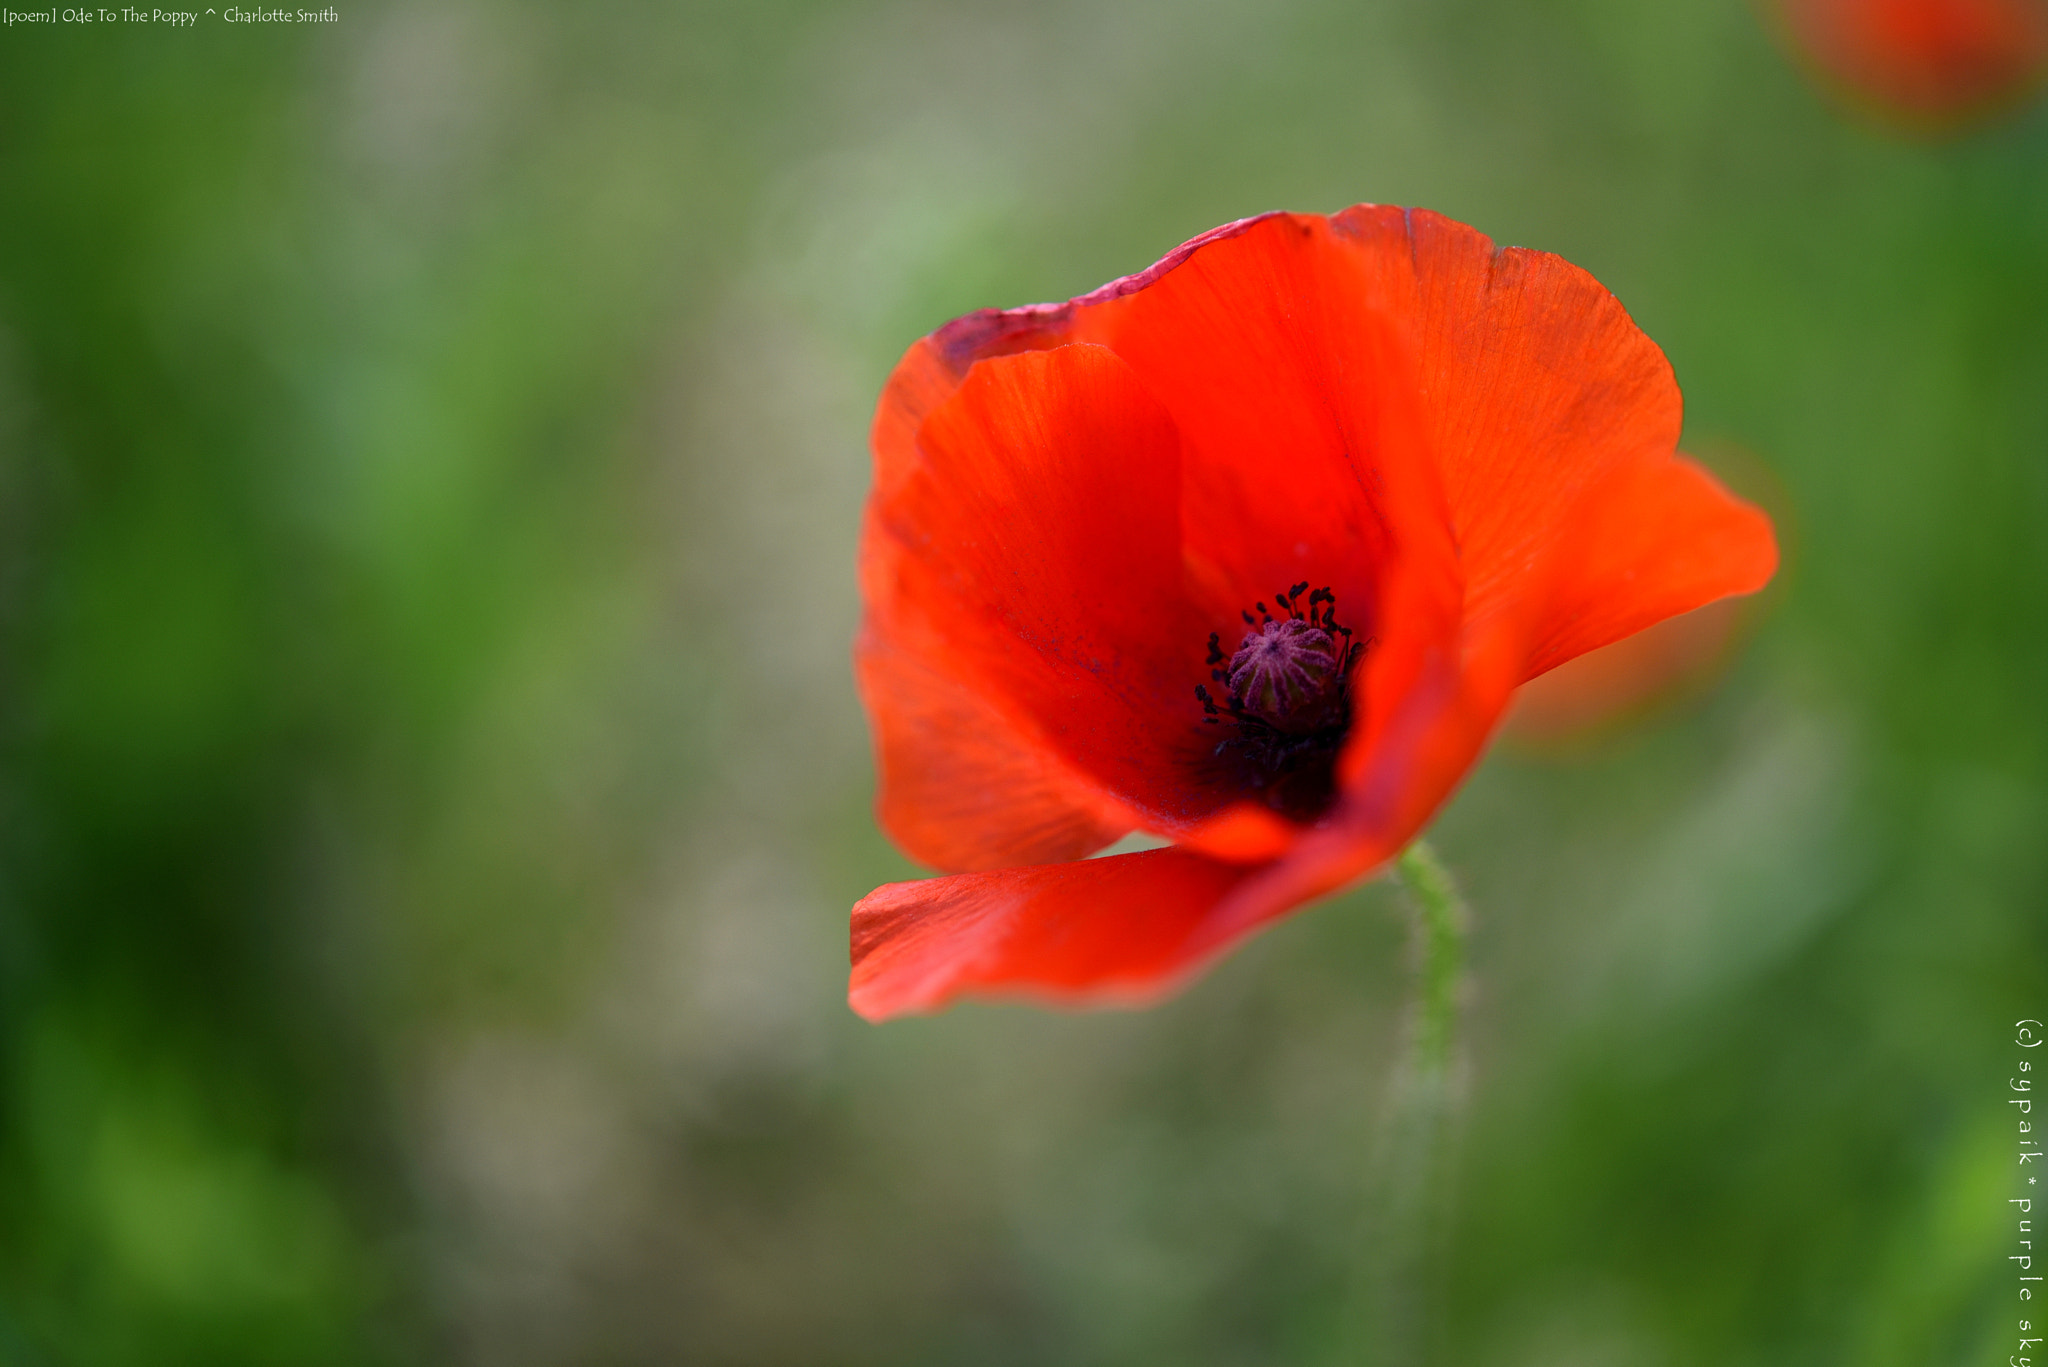 Nikon AF-S Micro-Nikkor 60mm F2.8G ED sample photo. Ode to the poppy ** photography